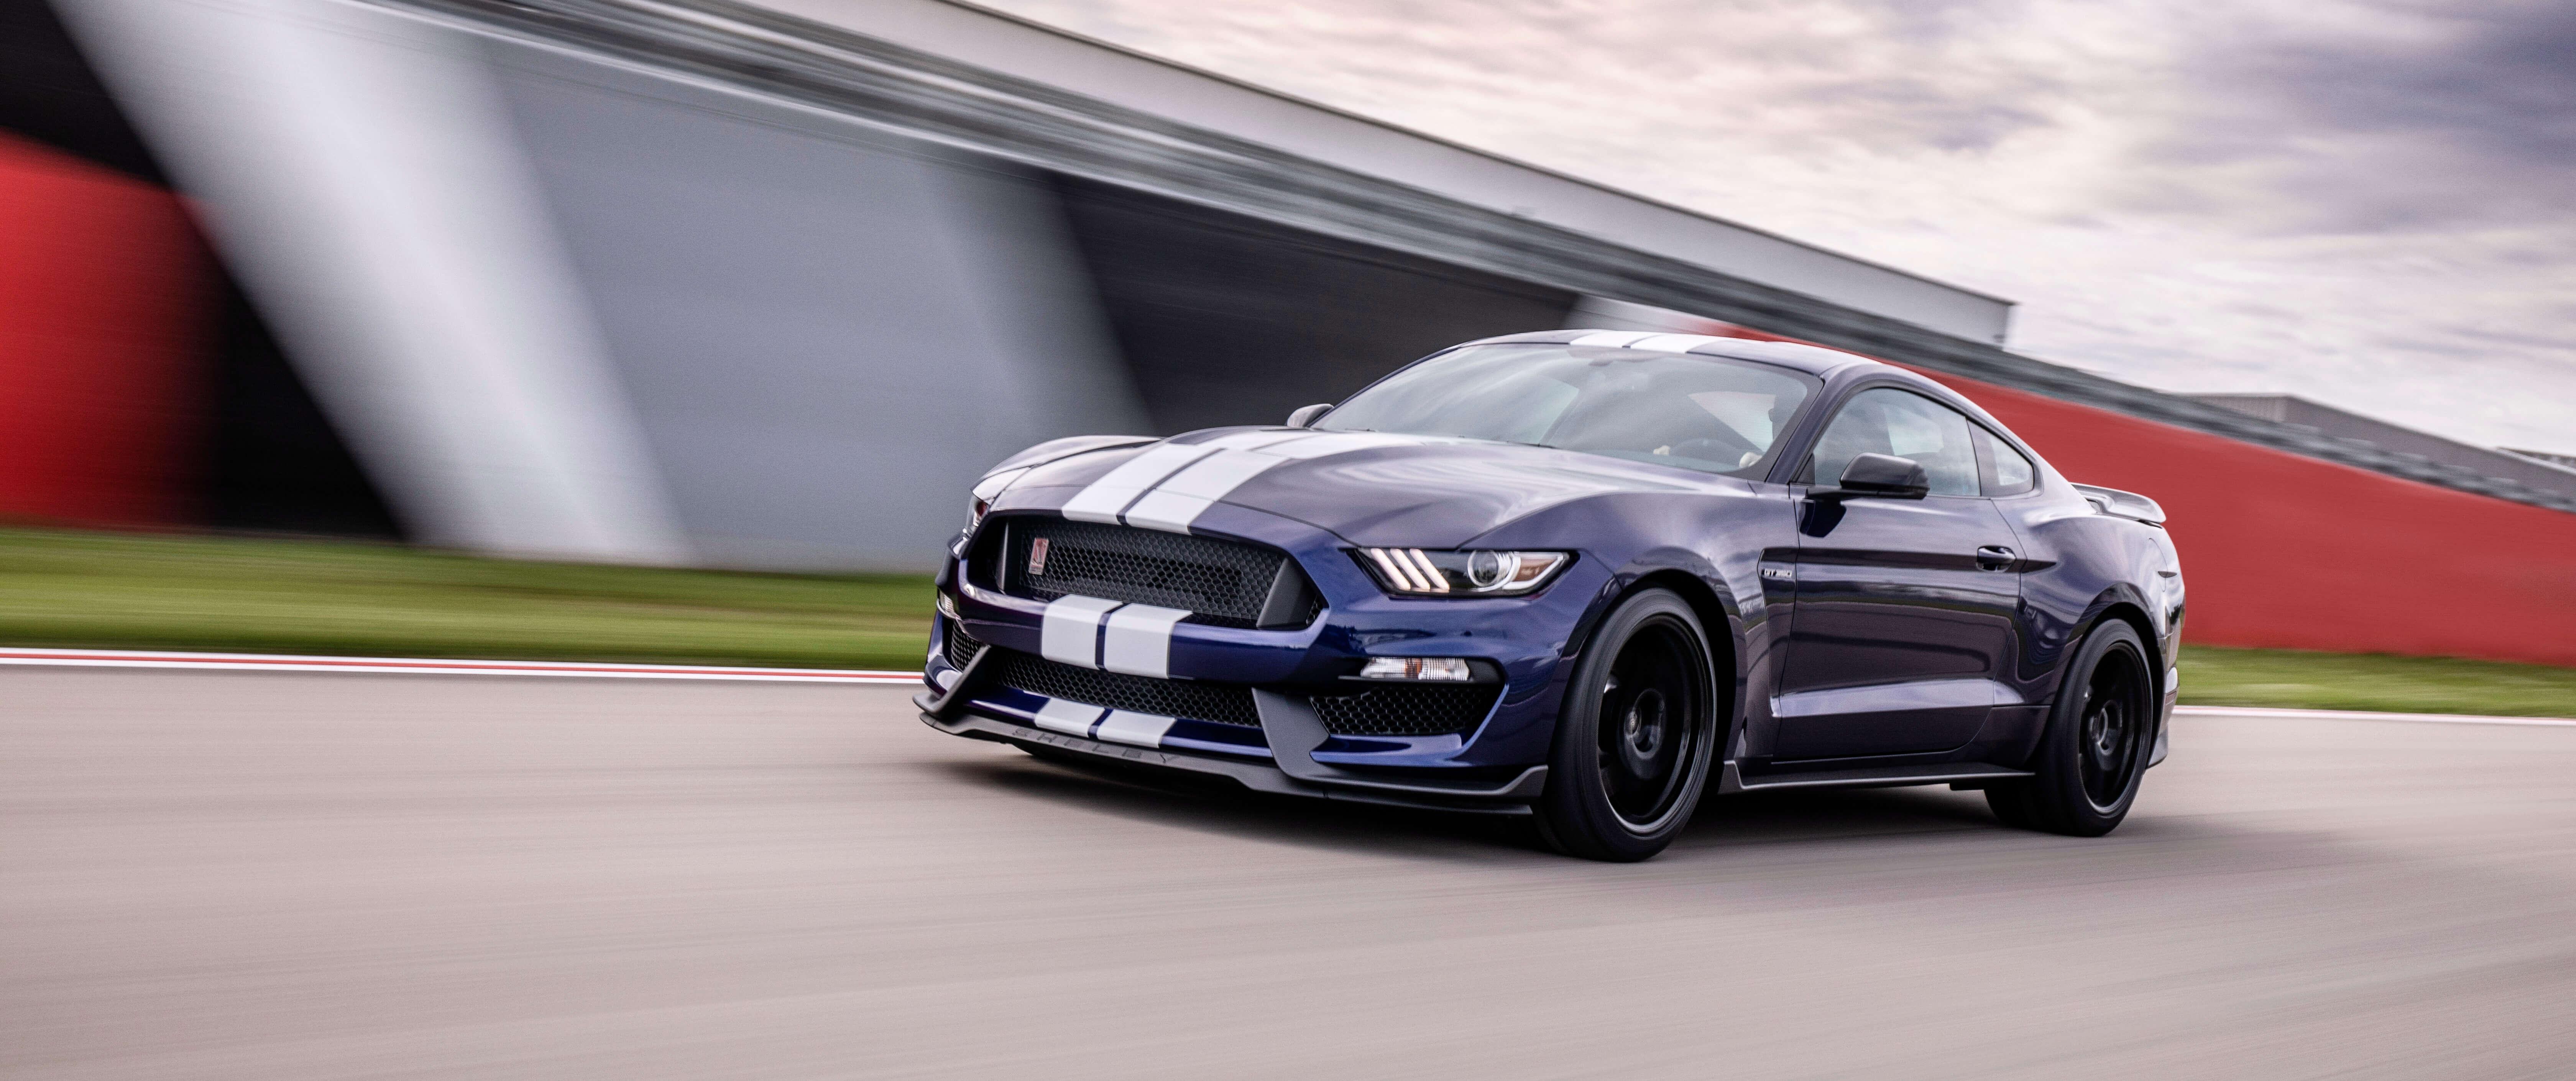 2019 Mustang Shelby GT350